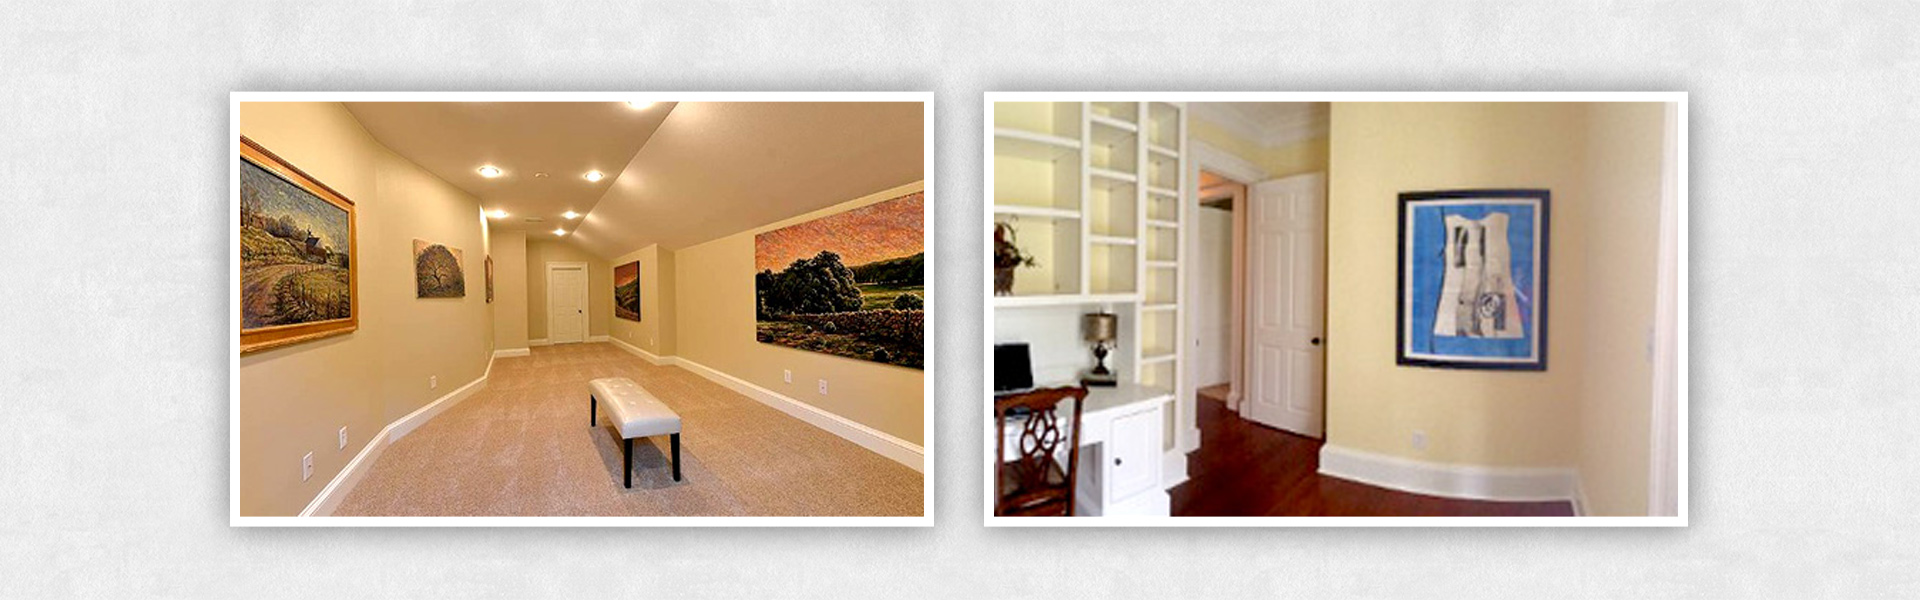 Paintings on the Wall in Hallway and in Room